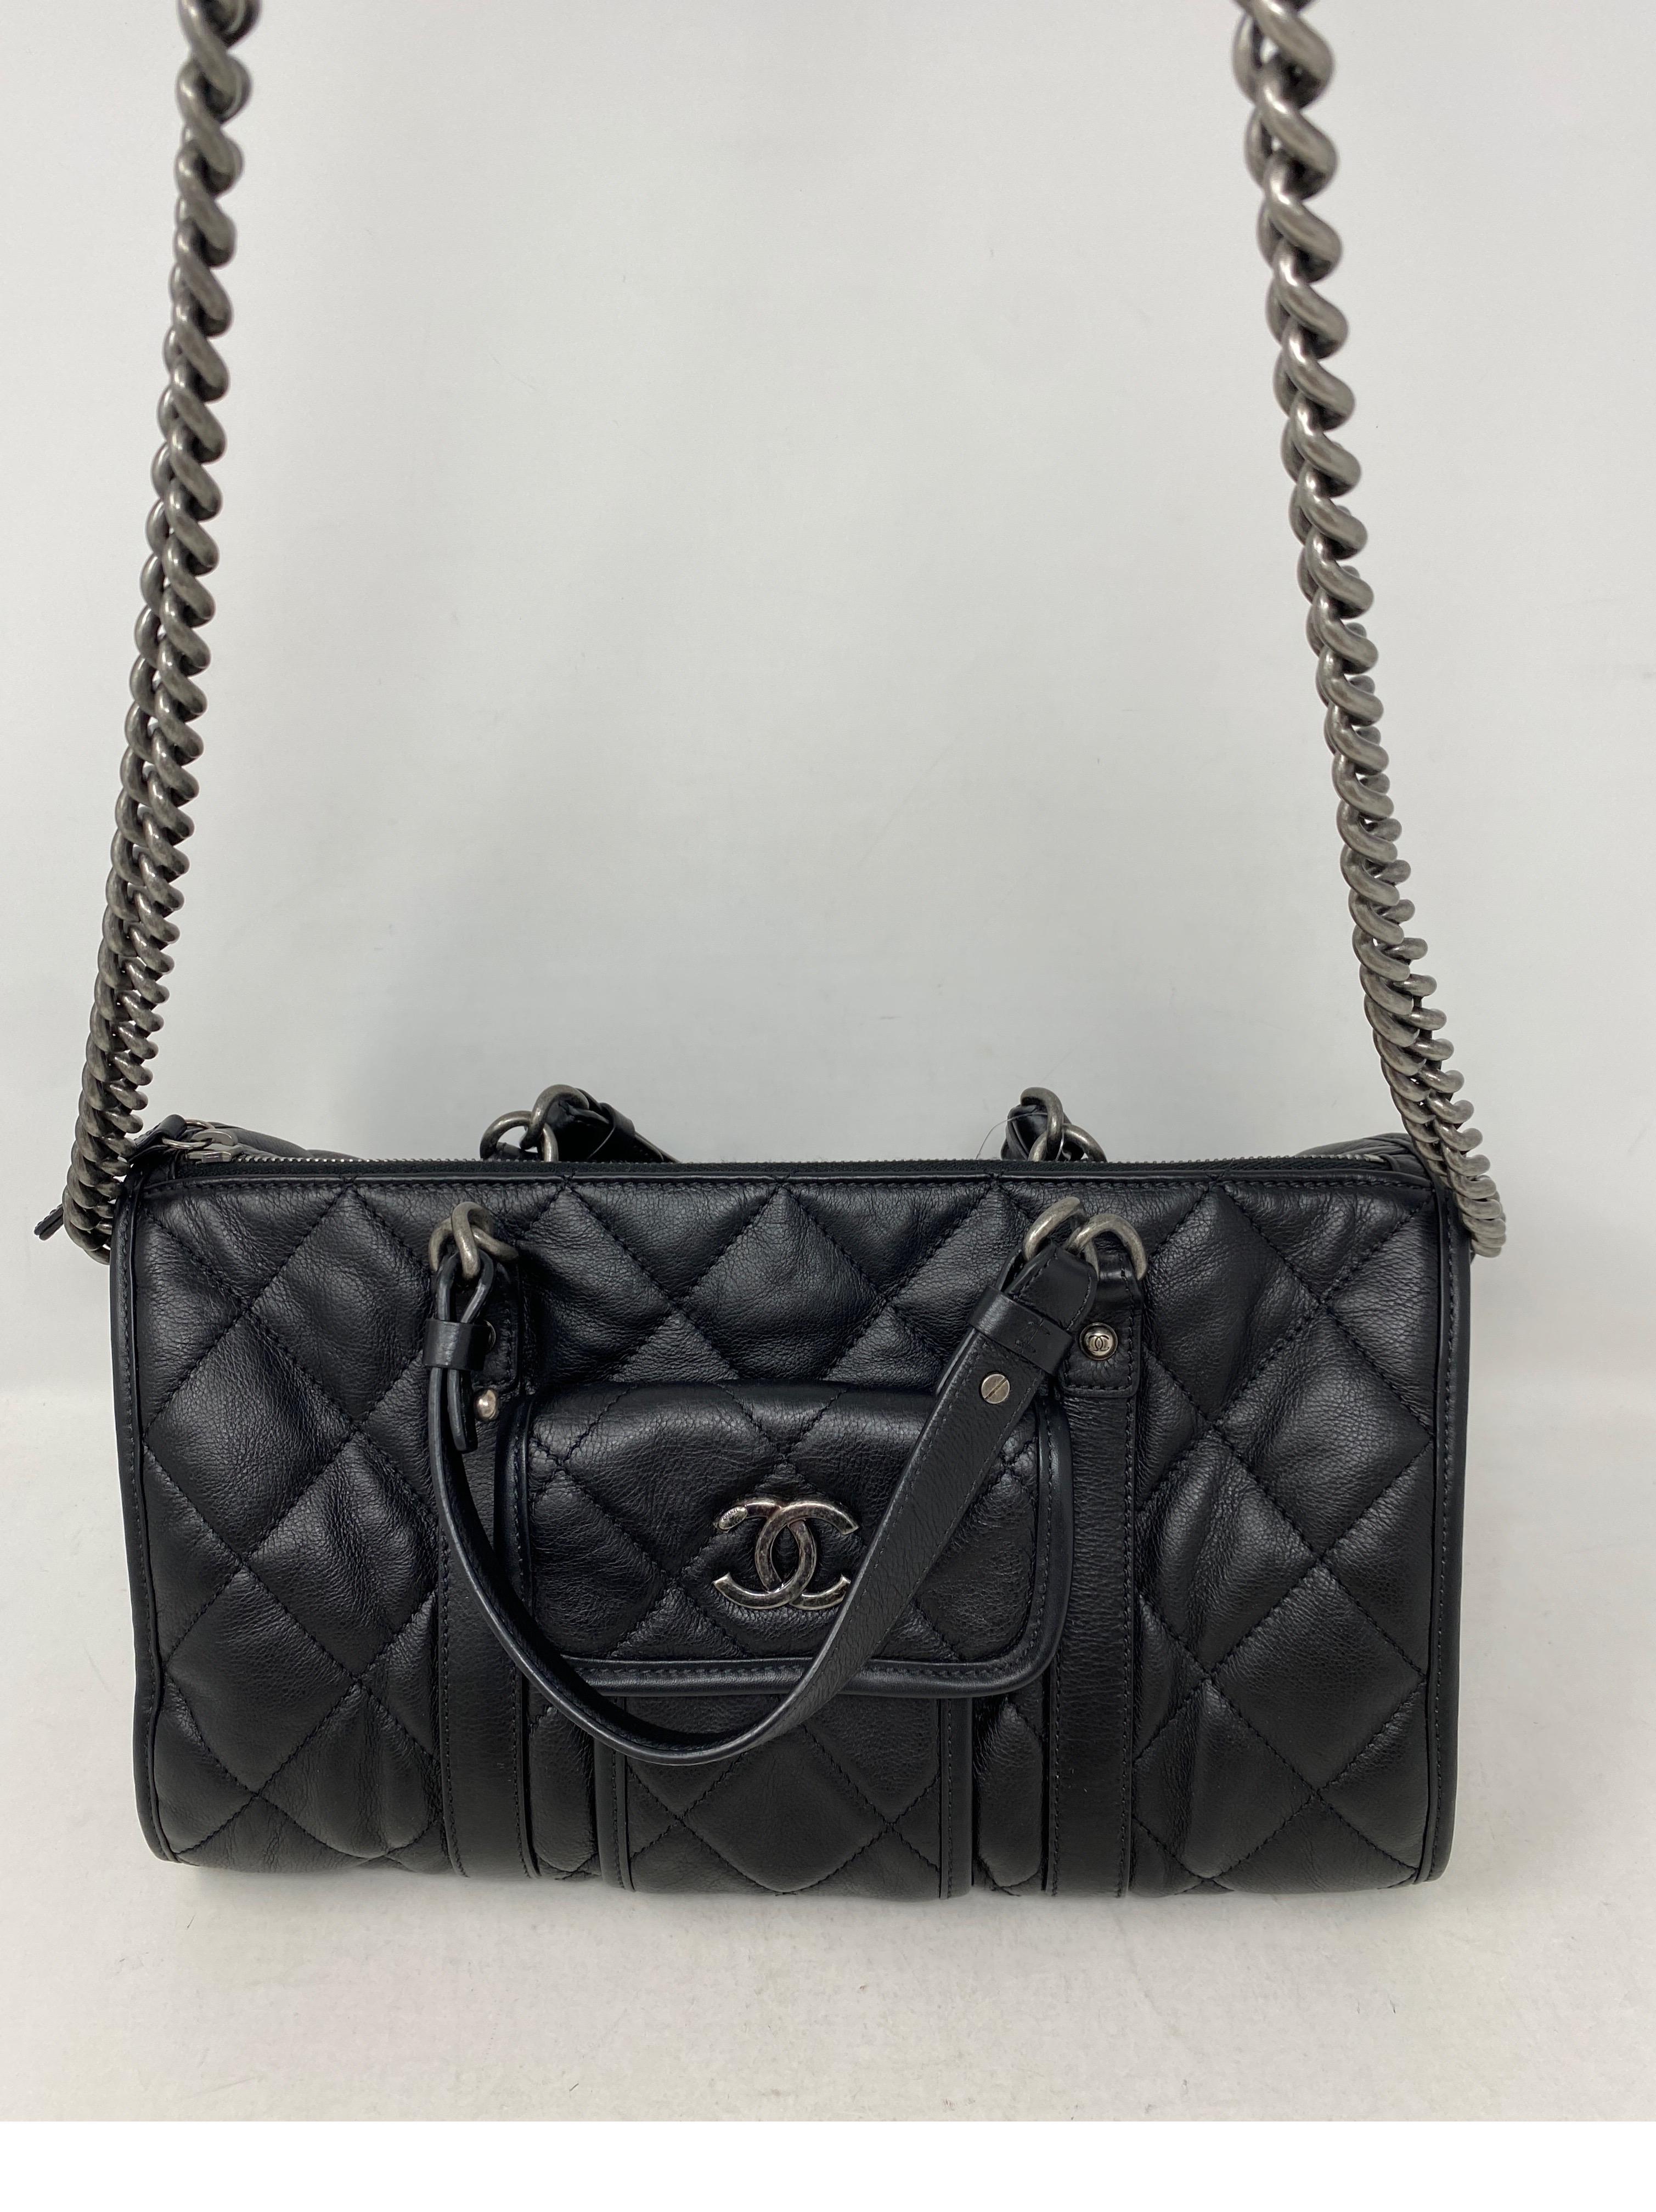 Chanel Doctors Bag. Style of boston bag. Calf leather with ruthenium hardware. Excellent like new condition. Guaranteed authentic. 